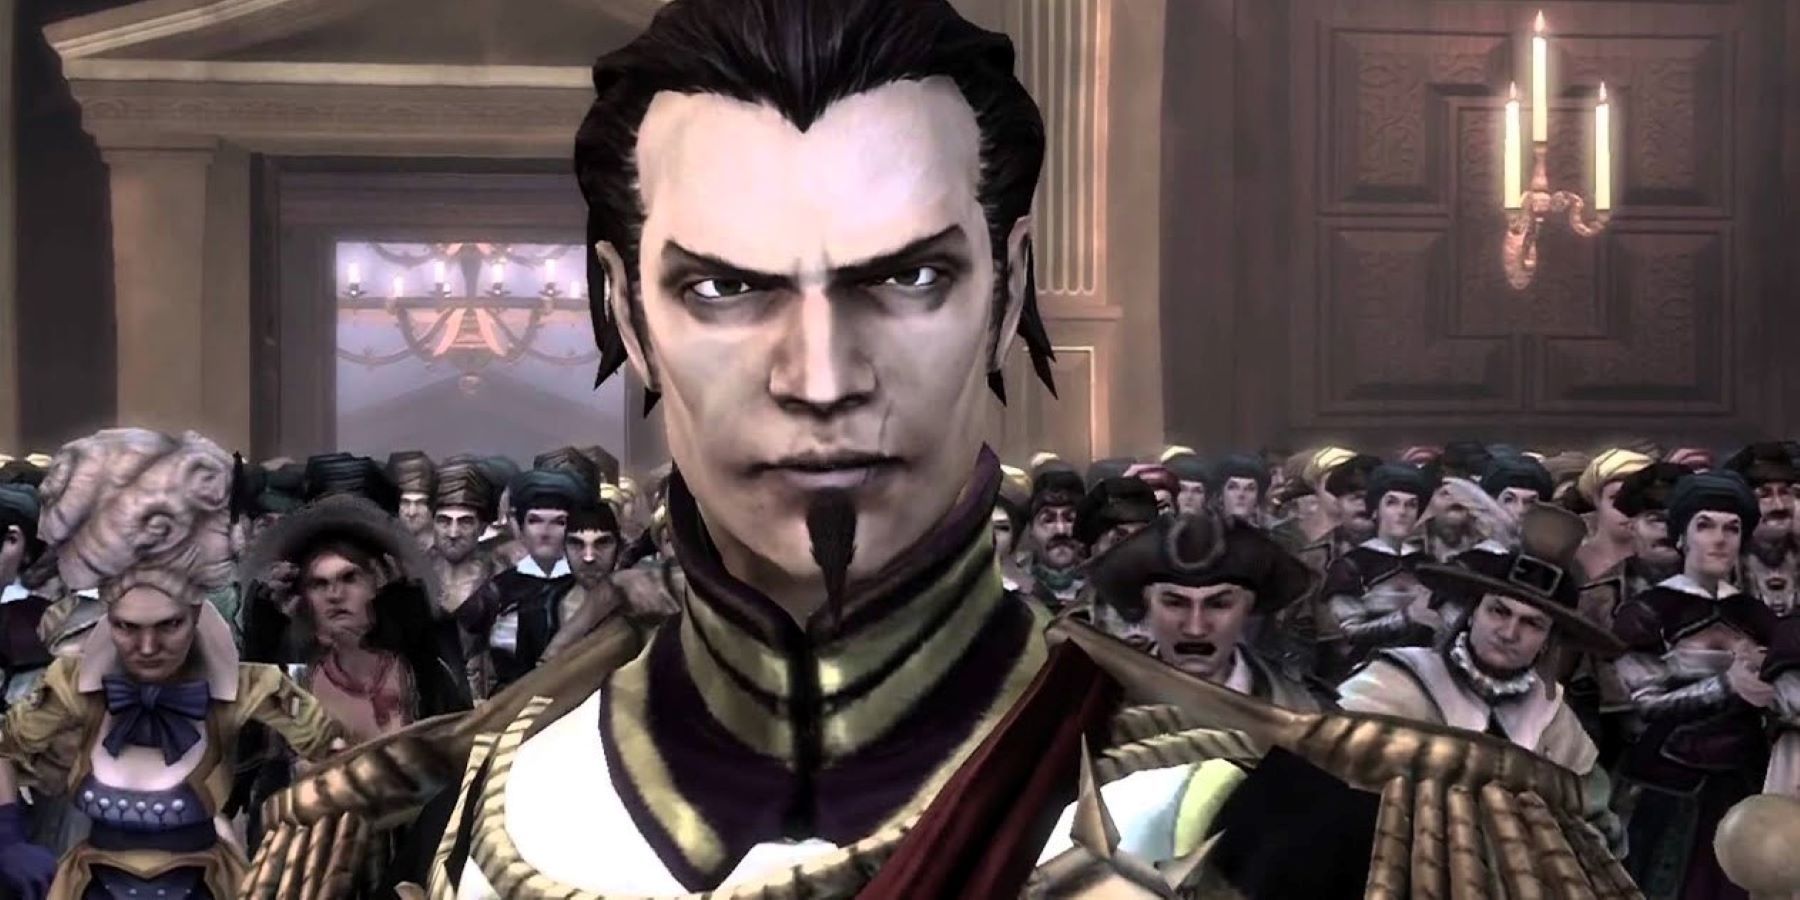 Fable 3's Logan facing judgment with a gathered crowd